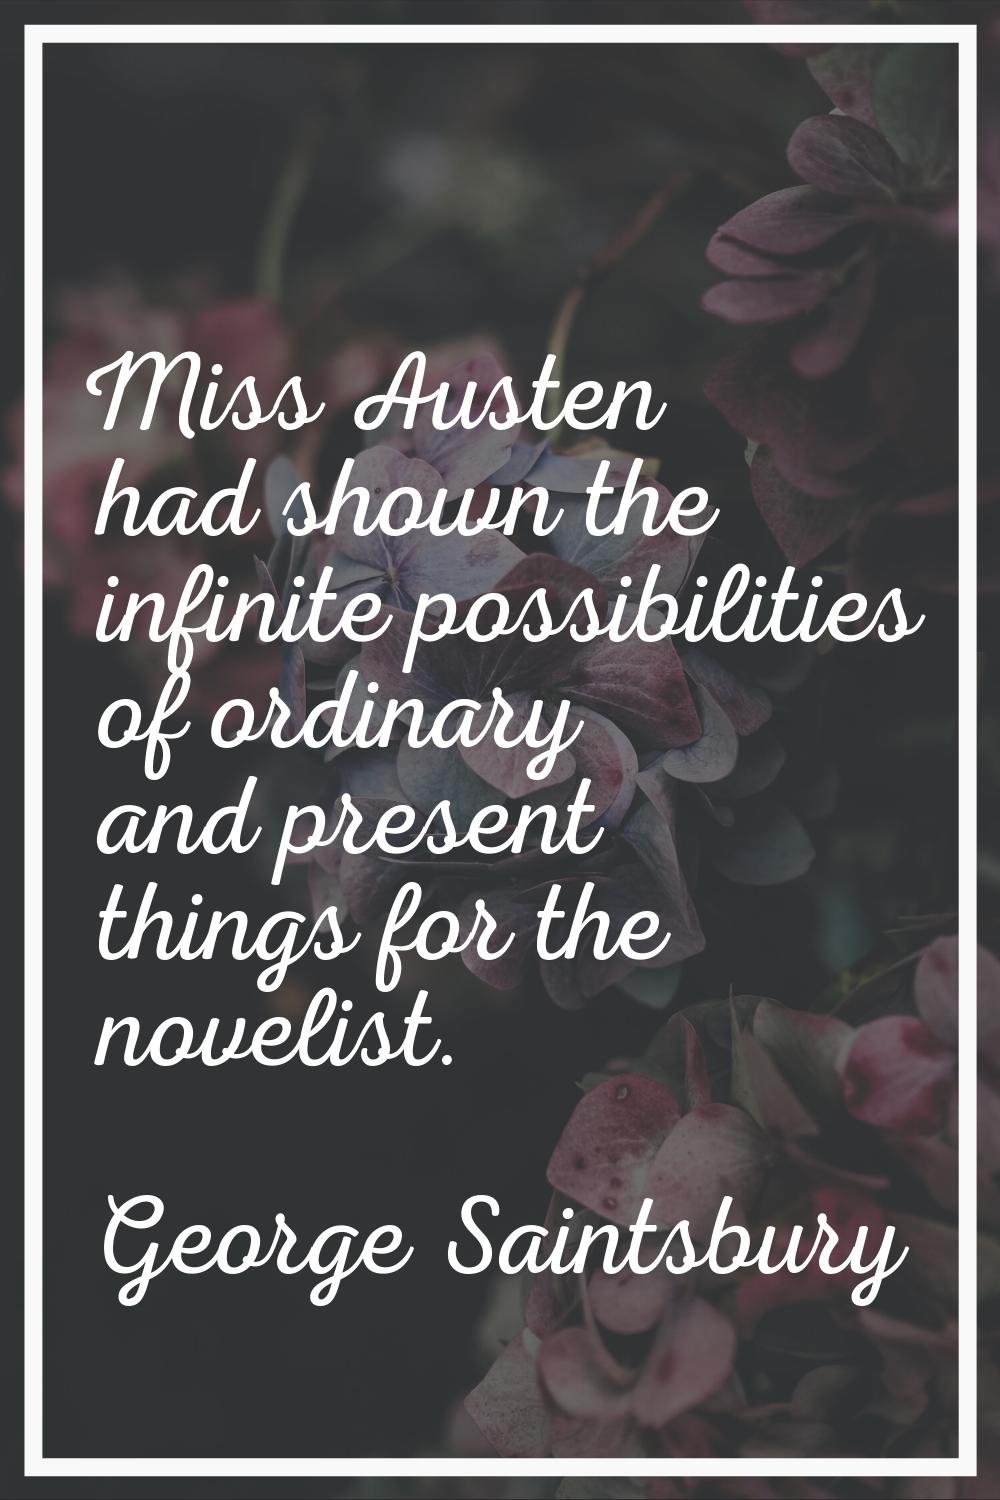 Miss Austen had shown the infinite possibilities of ordinary and present things for the novelist.